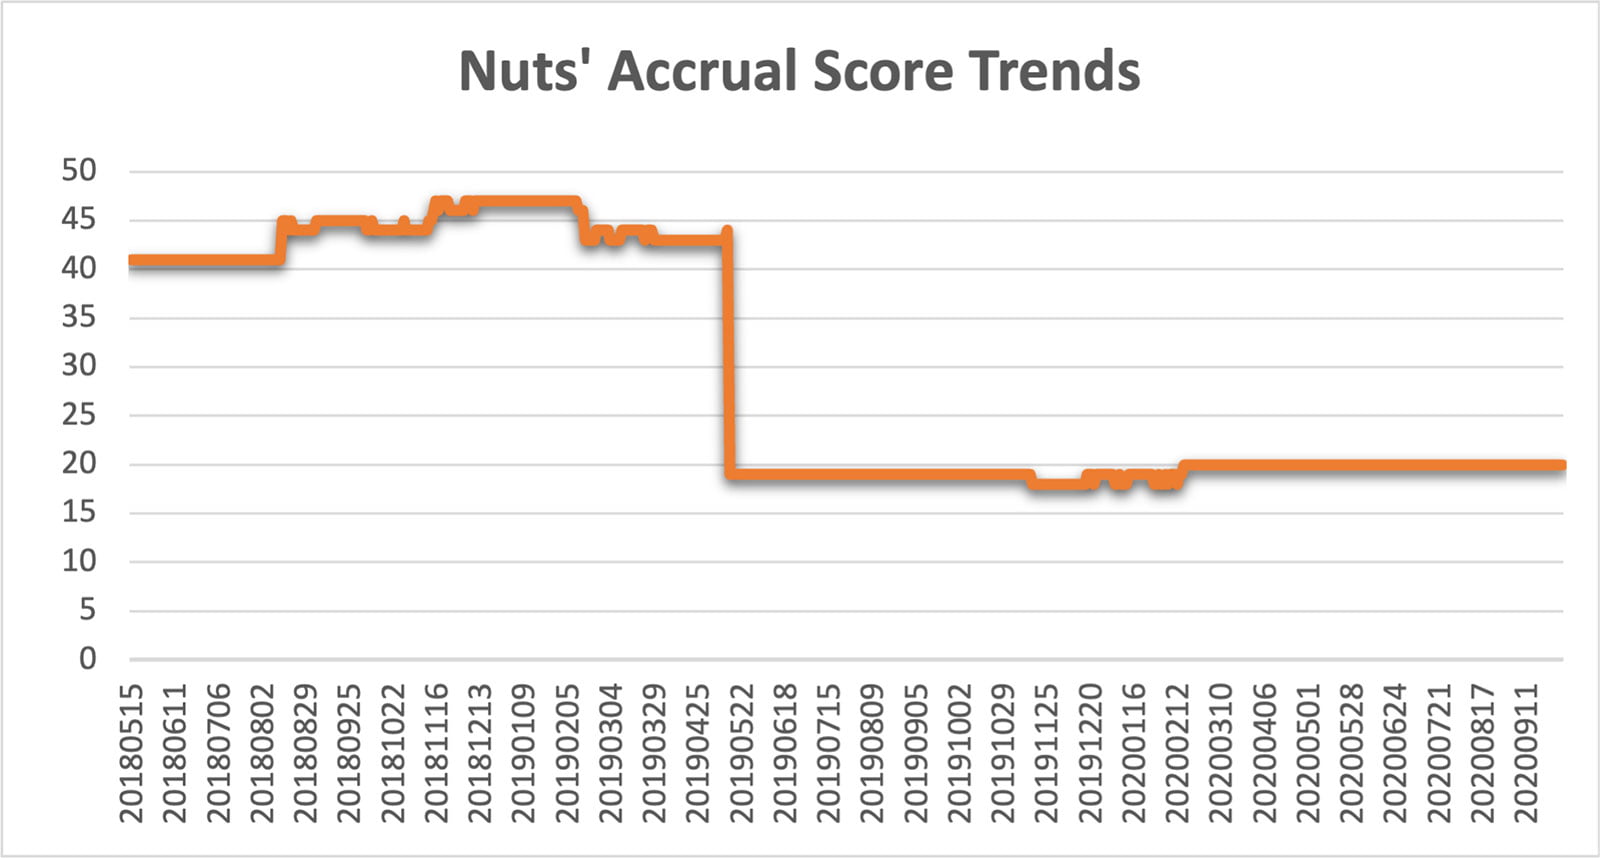 Nuts' Accrual Score Trends